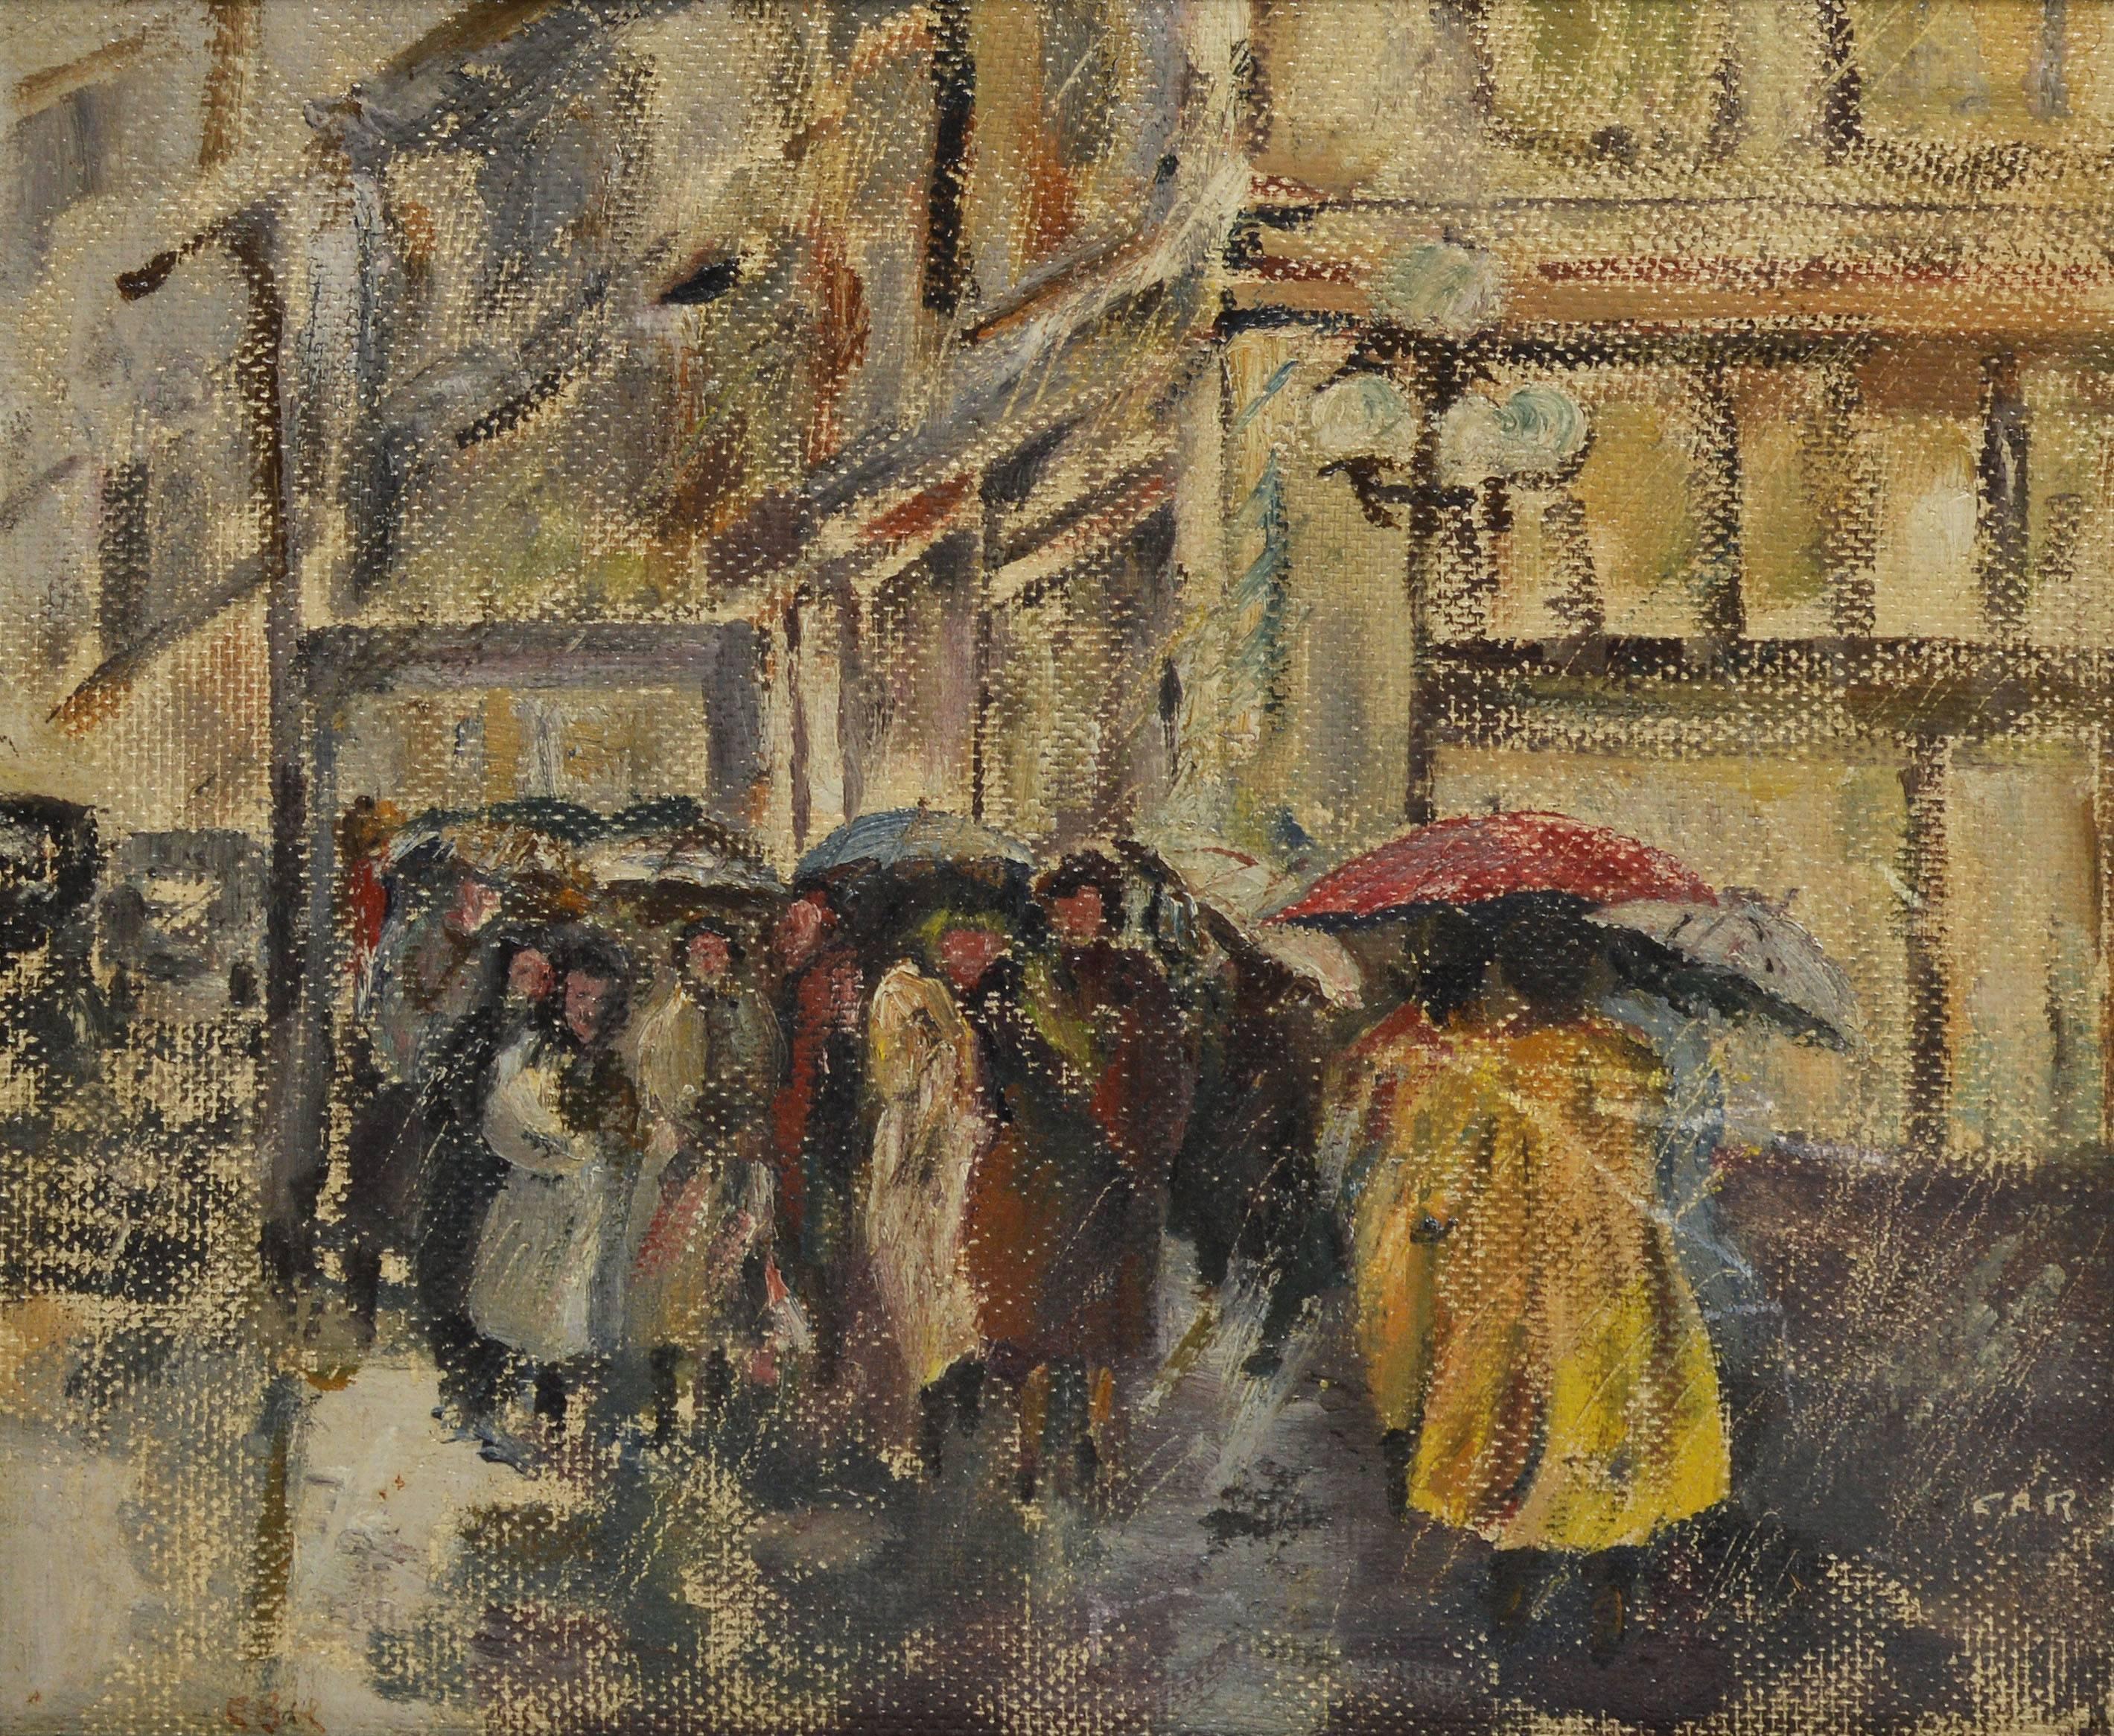 Modernist View of a Rainy Street - Brown Landscape Painting by Unknown